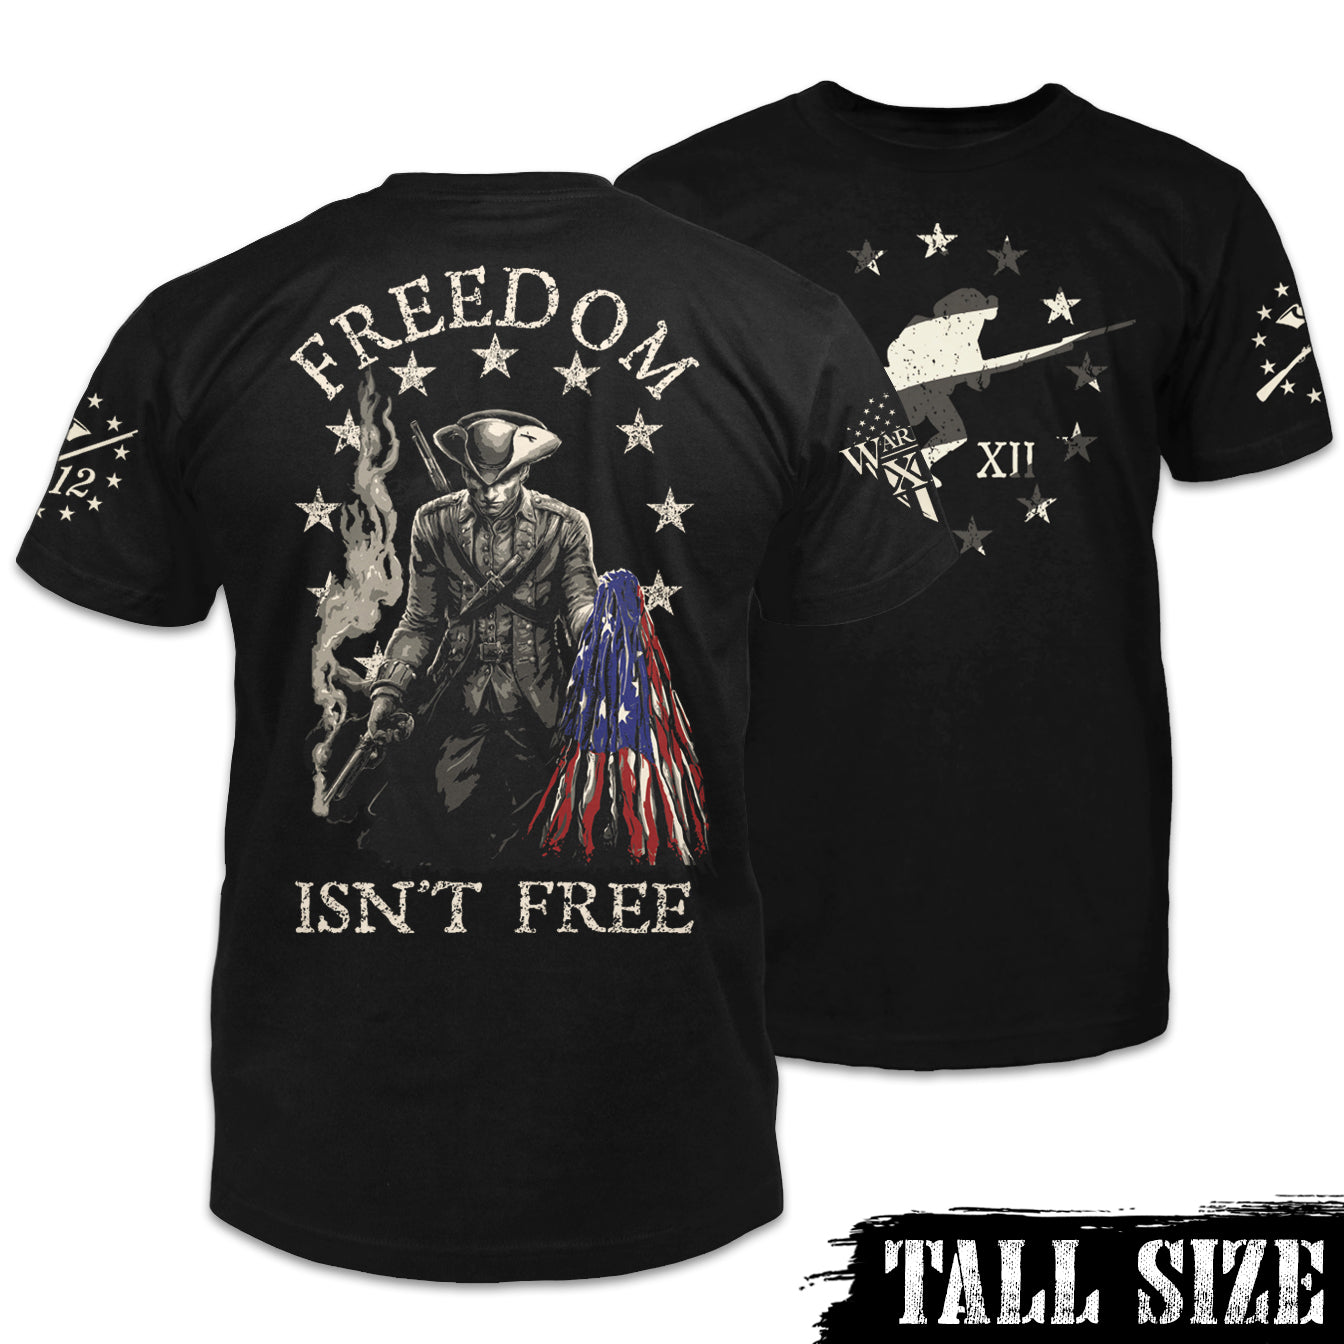 Front & back black tall size shirt pays tribute to the Minuteman, the original American Patriot, and our forefathers who fought relentlessly against the tyranny of Britain.The back of the shirt has an infaltry soldier holding a ripped USA flag printed on it.